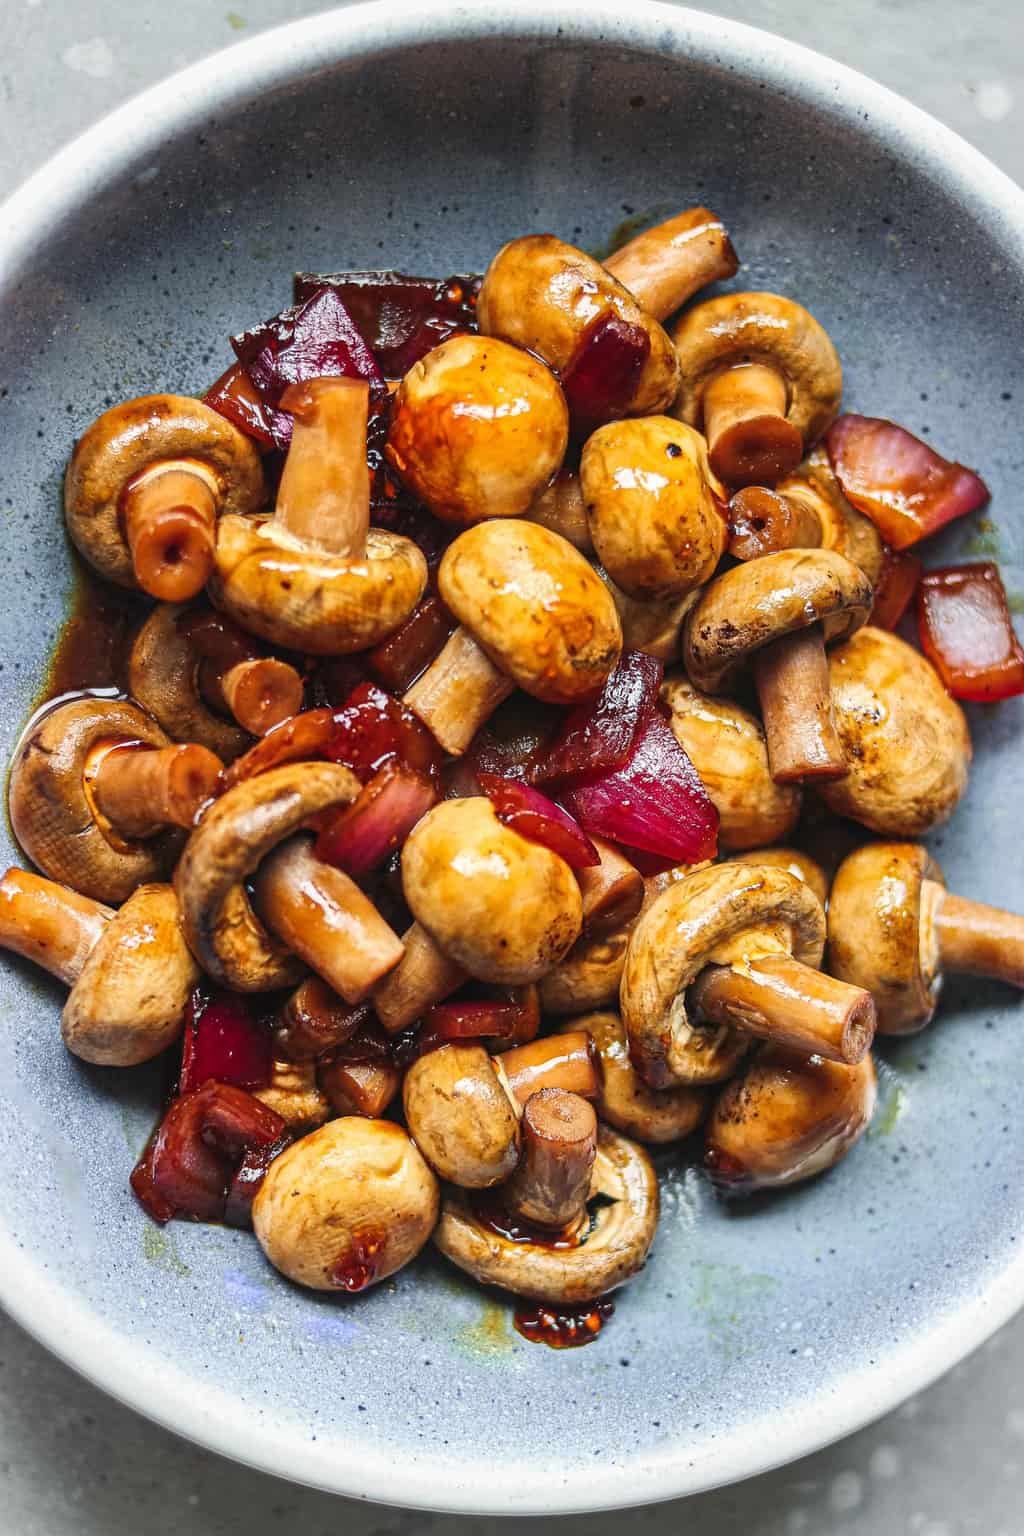 Mushrooms in a blue bowl with a miso glaze